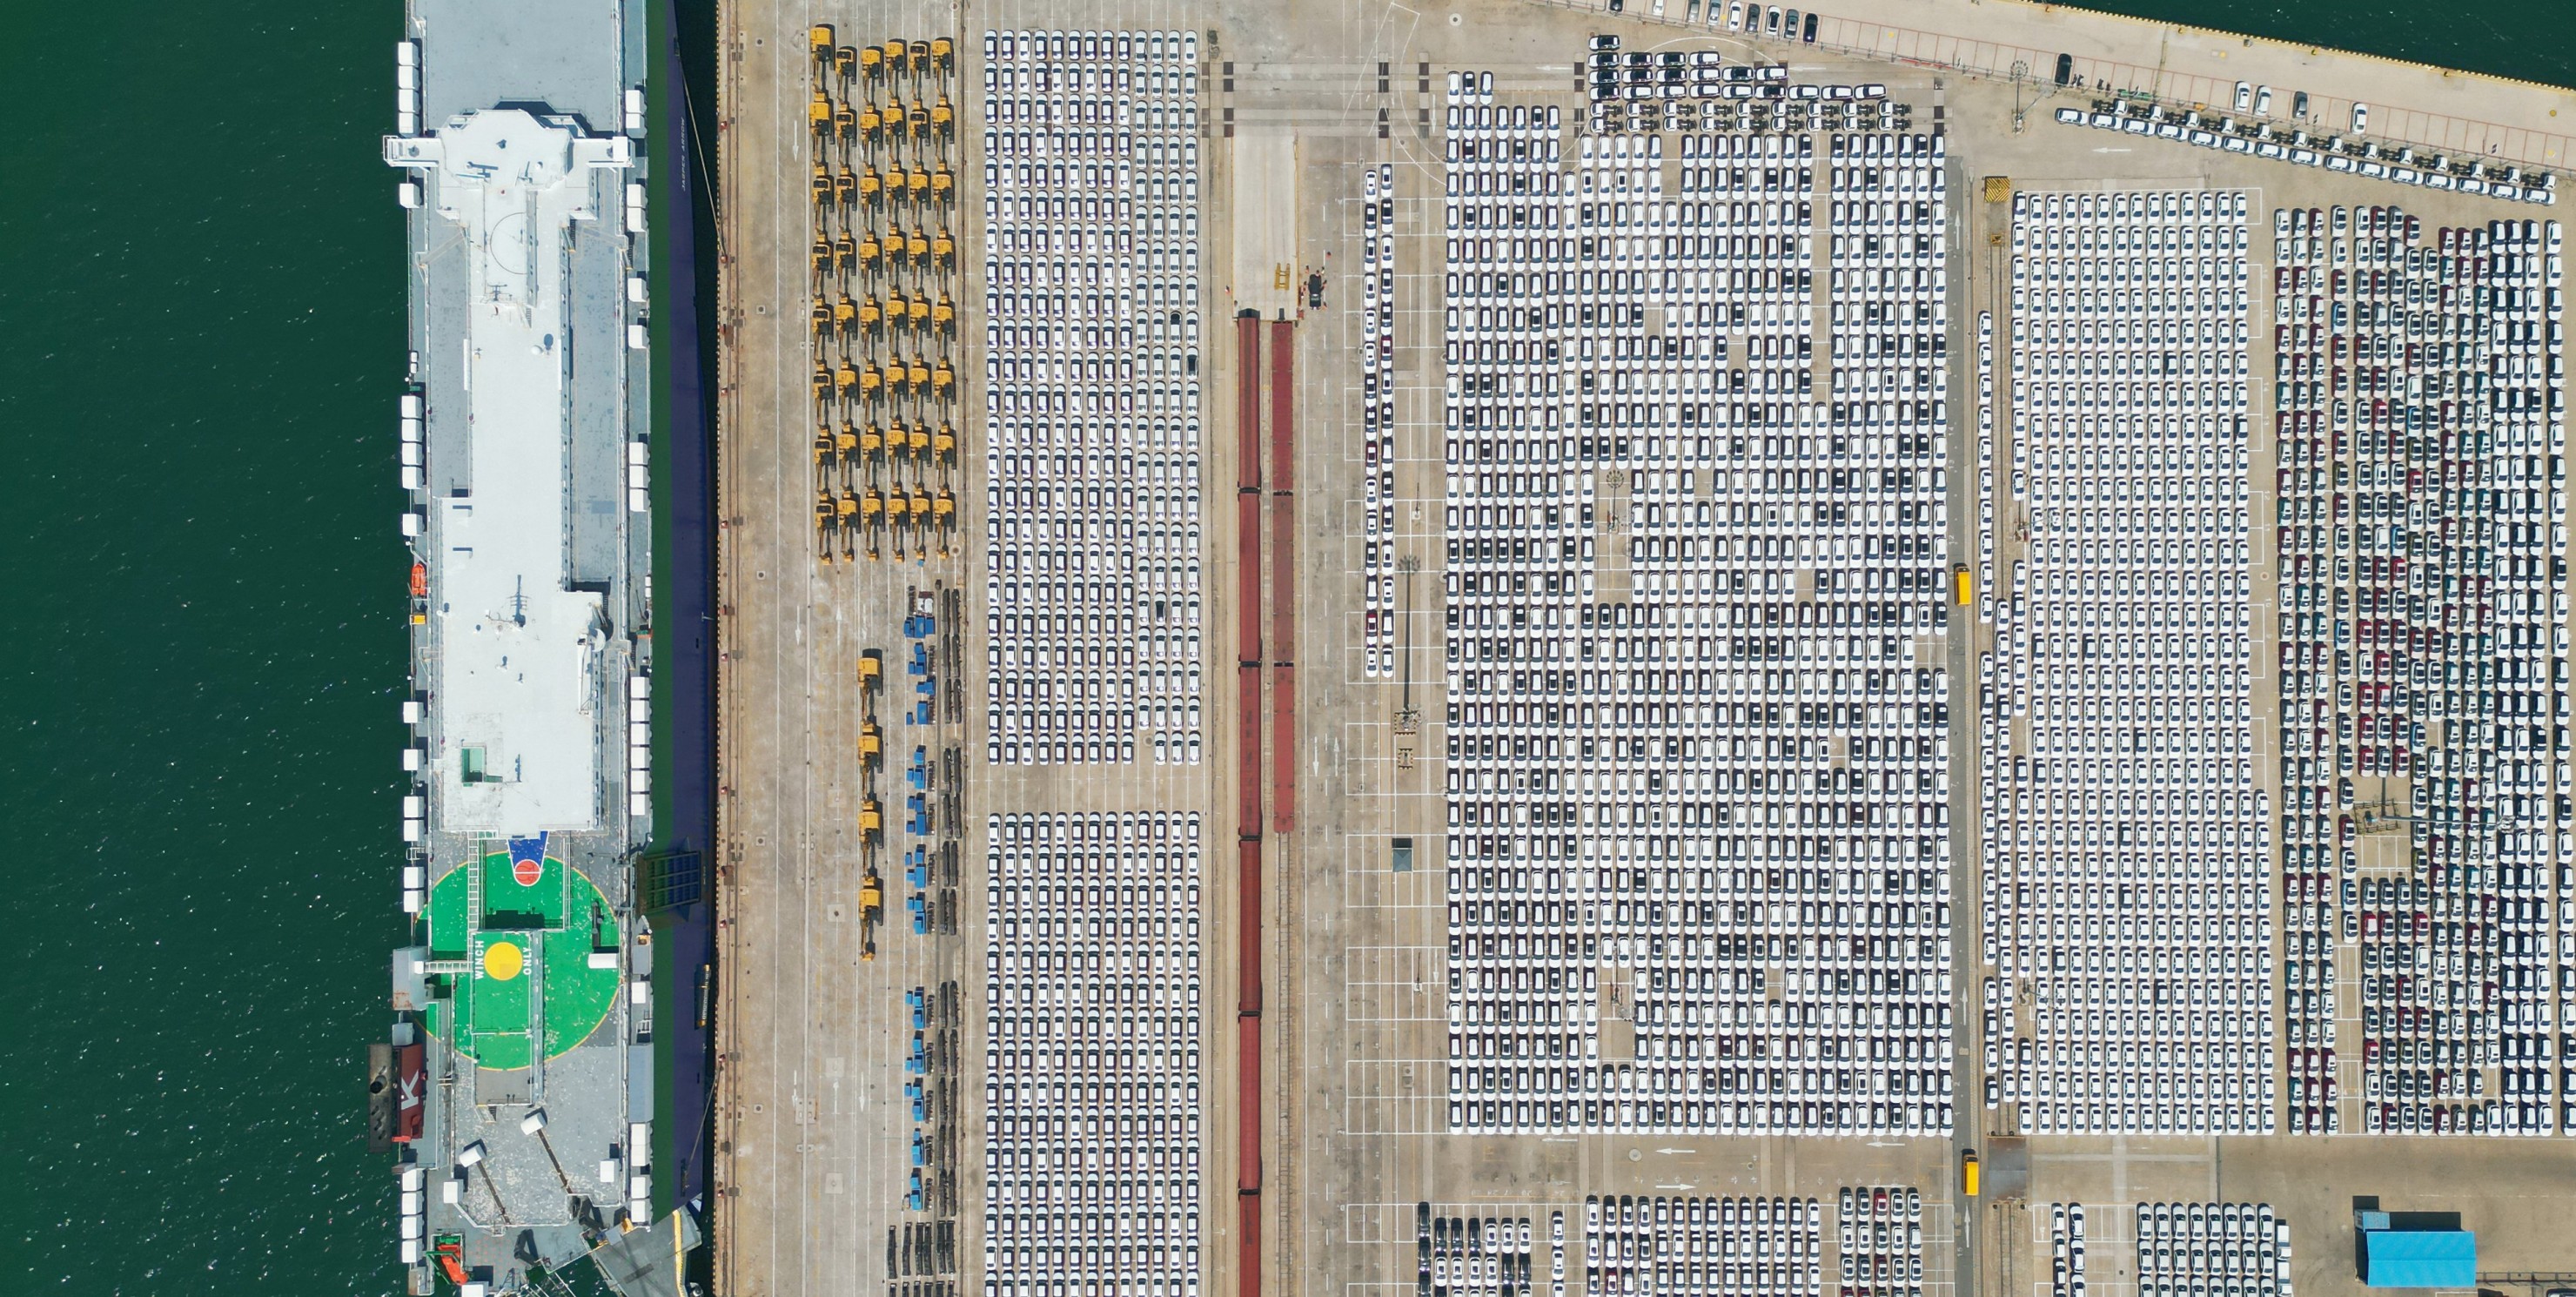 A large number of vehicles for export goods are waiting to be loaded at The port of Yantai, East China's Shandong Province.